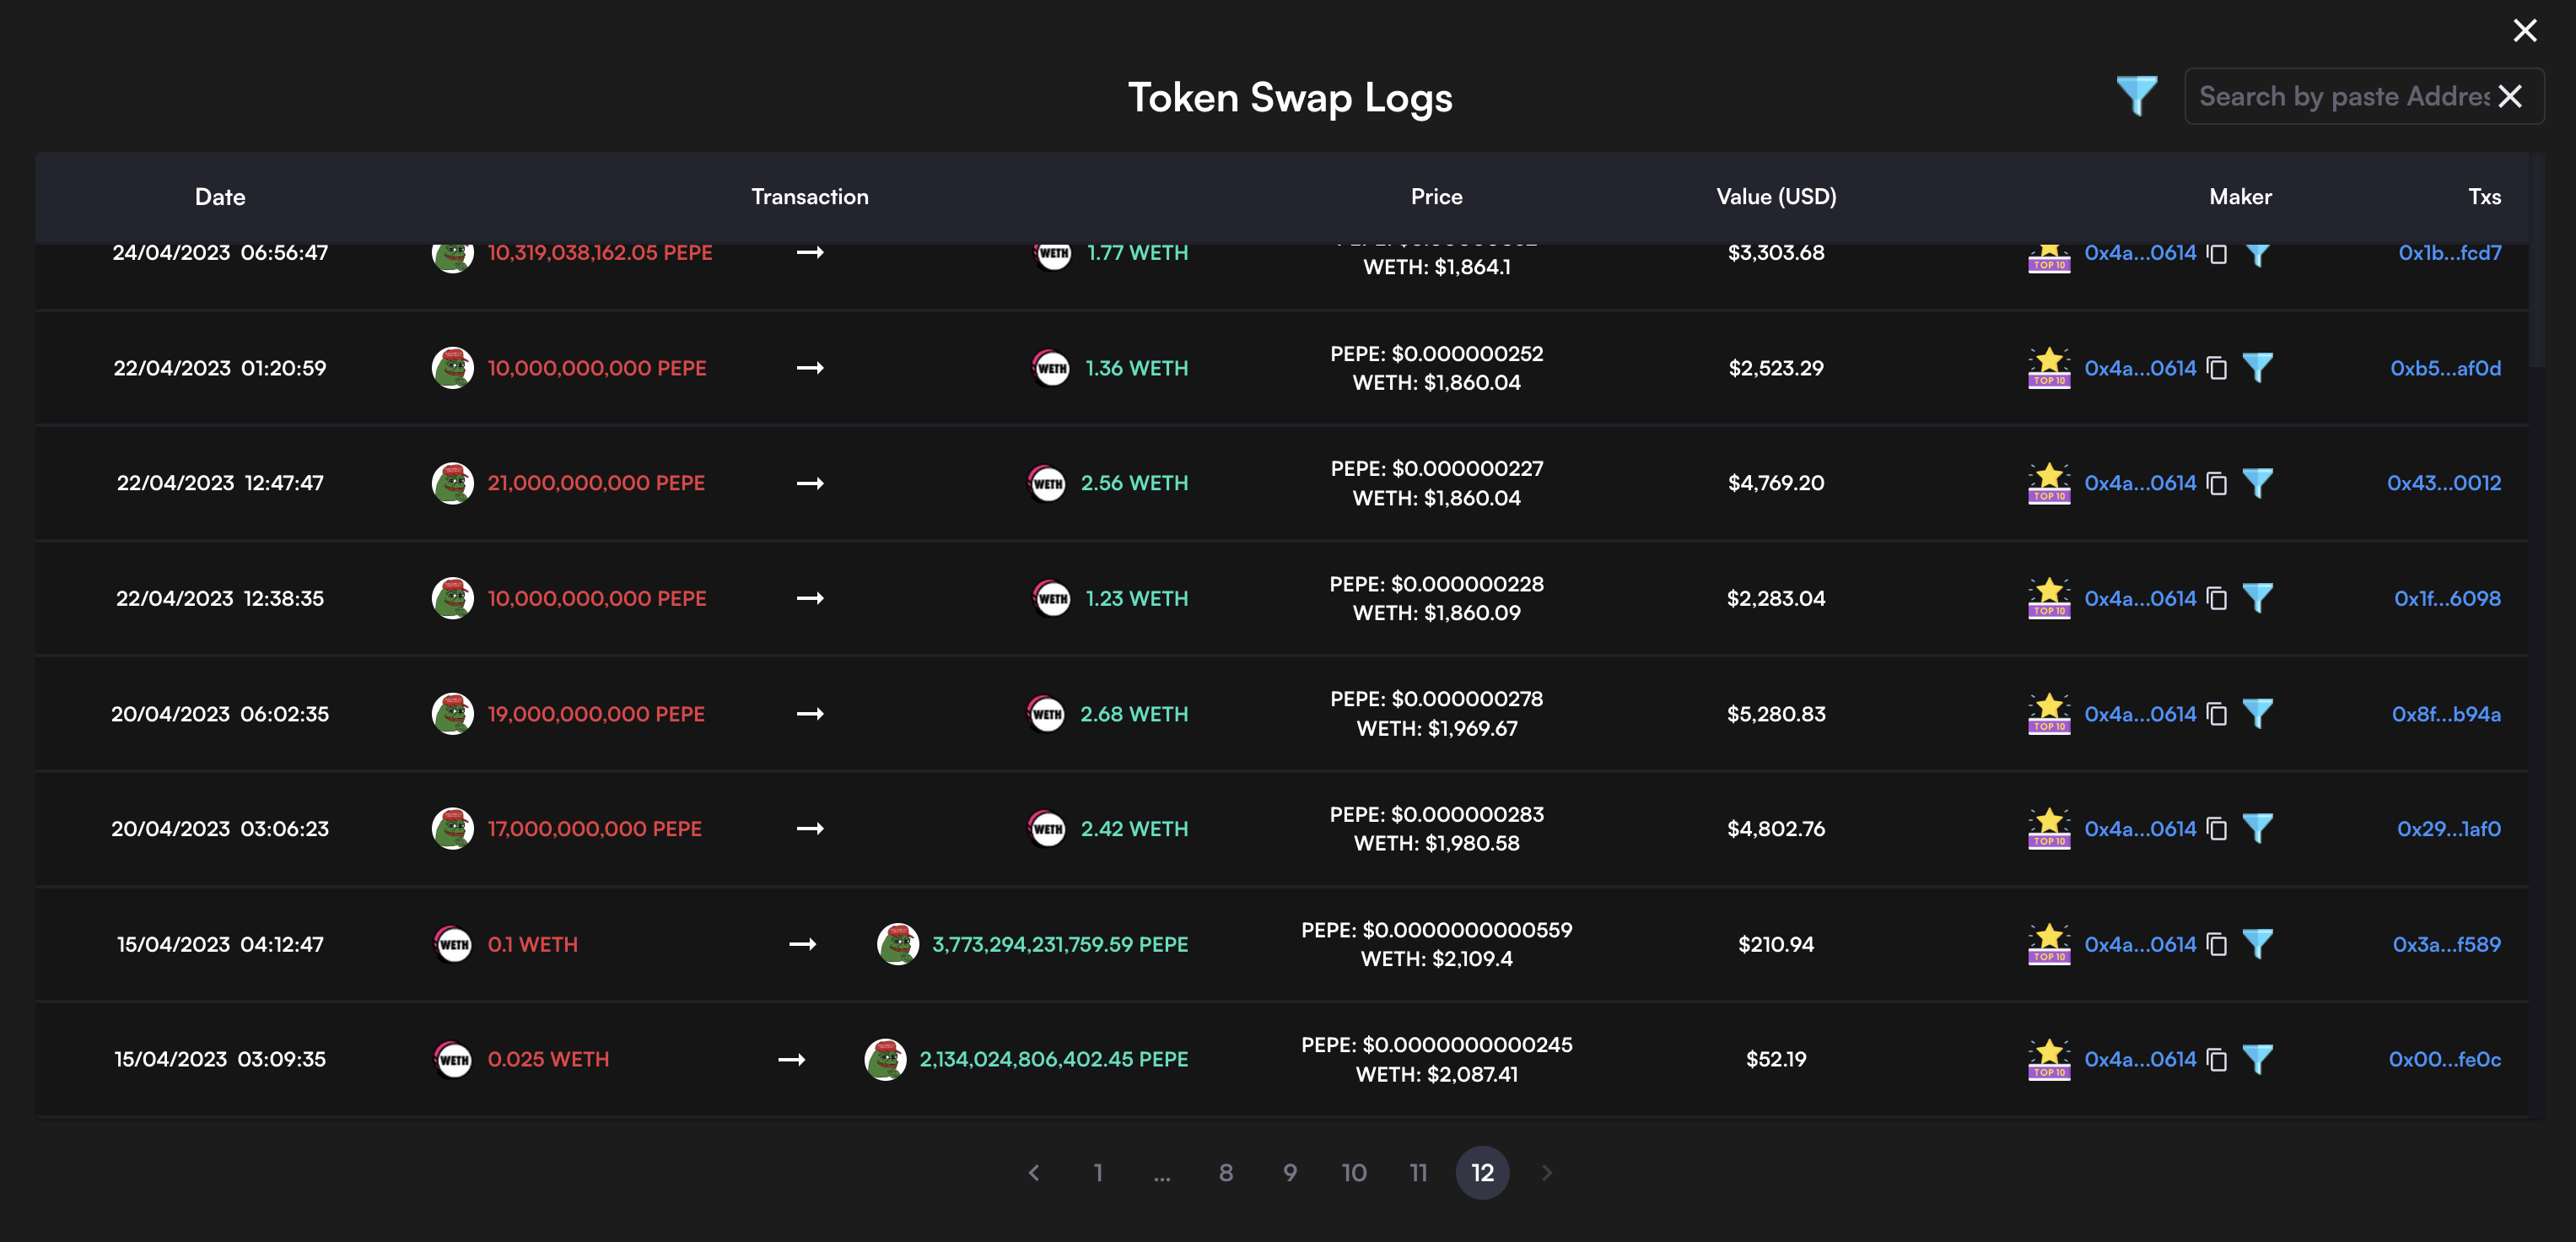 On April 15, 2023, this remarkable wallet invested $263.13 to acquire $PEPE tokens. Over the course of 30 days, from April 20 to May 19, it executed a total of 118 well-timed trades, resulting in a staggering profit of $4,156,778.09.